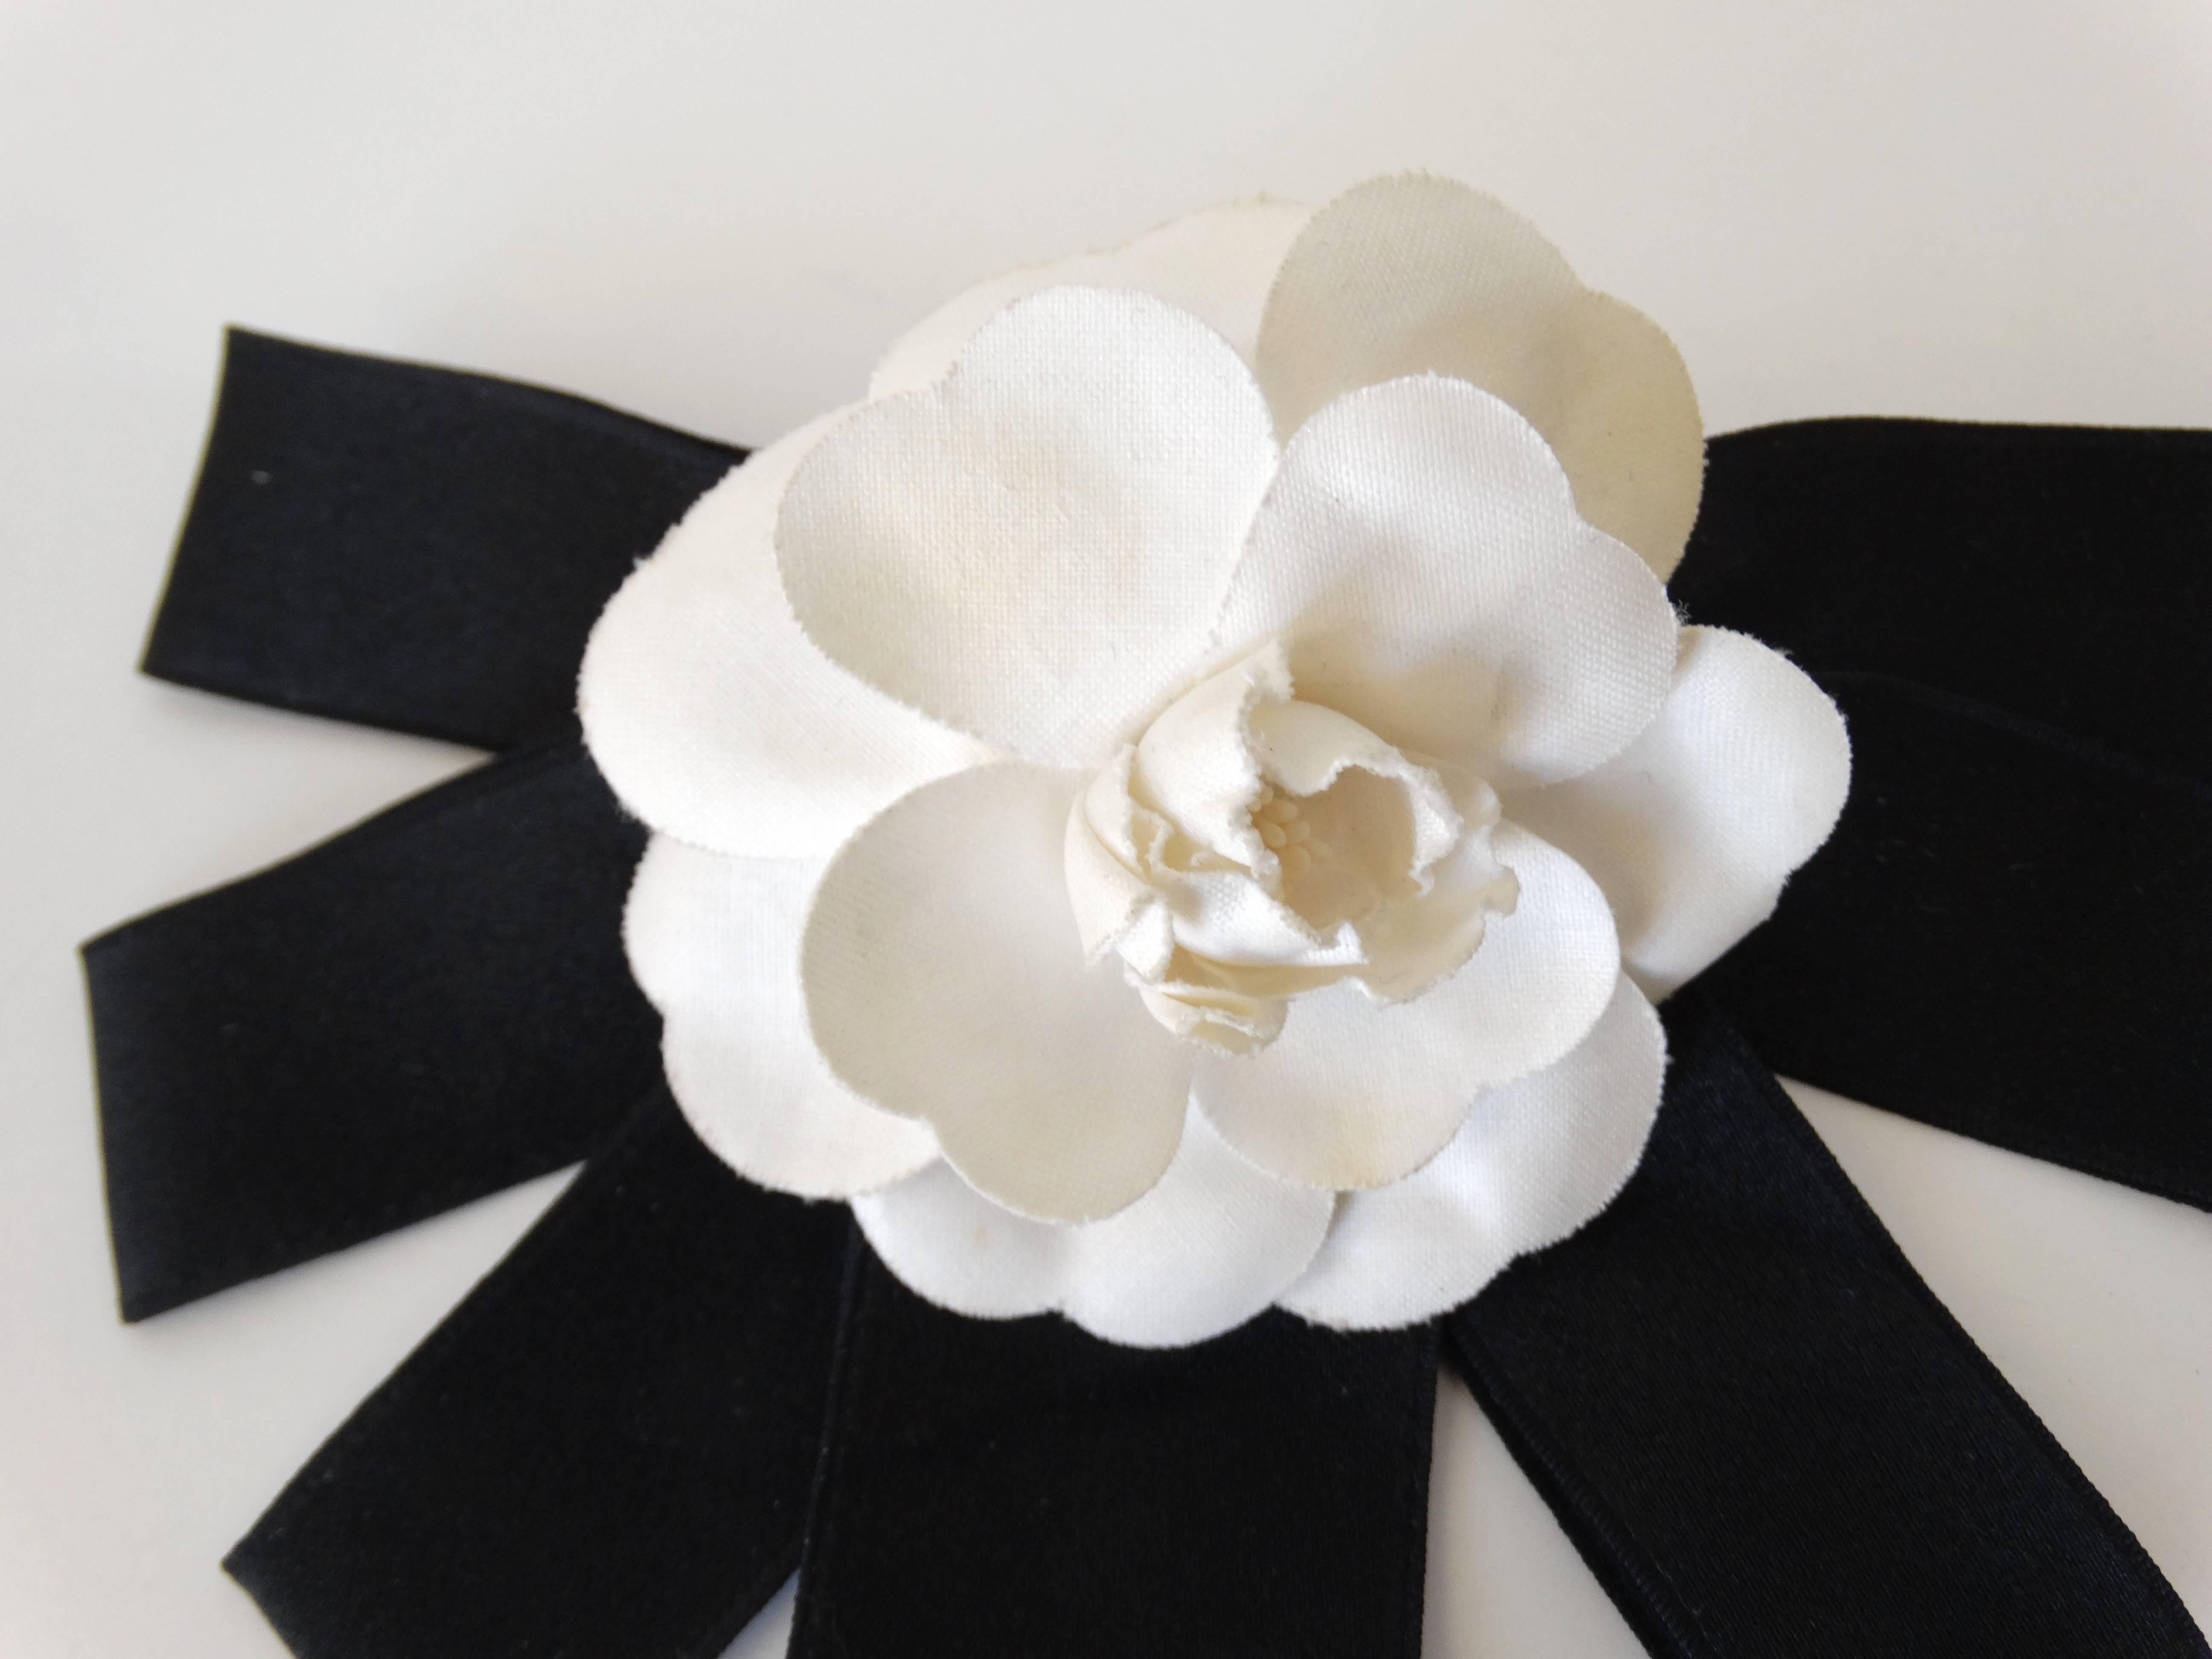 1980's rare large Chanel Camellia flower hair barrette with 7 pieces of ribed ribbon which form a half circle. 9 inches across Chanel signature plate attached on the back. Dates to the 1980s 